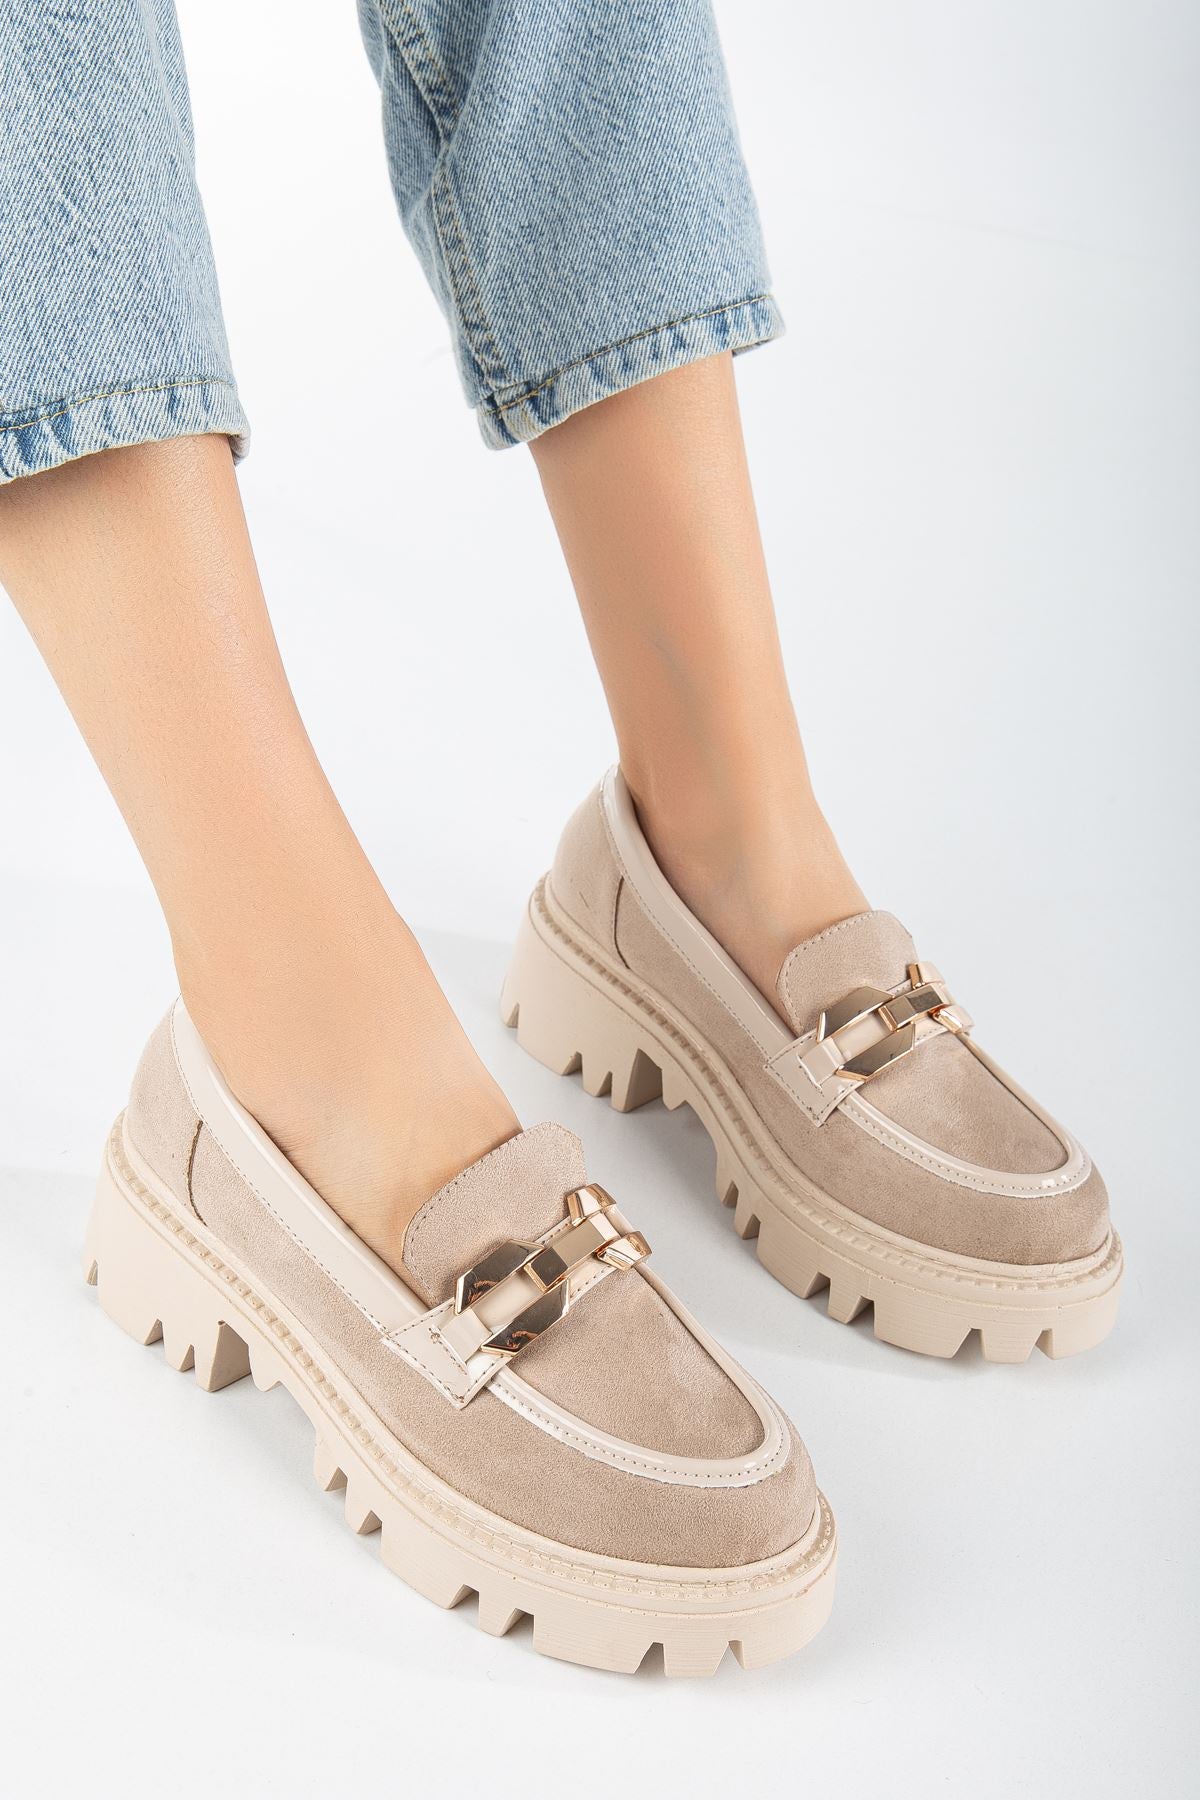 SONO Cream Suede Oxford Women's Shoes - STREETMODE ™